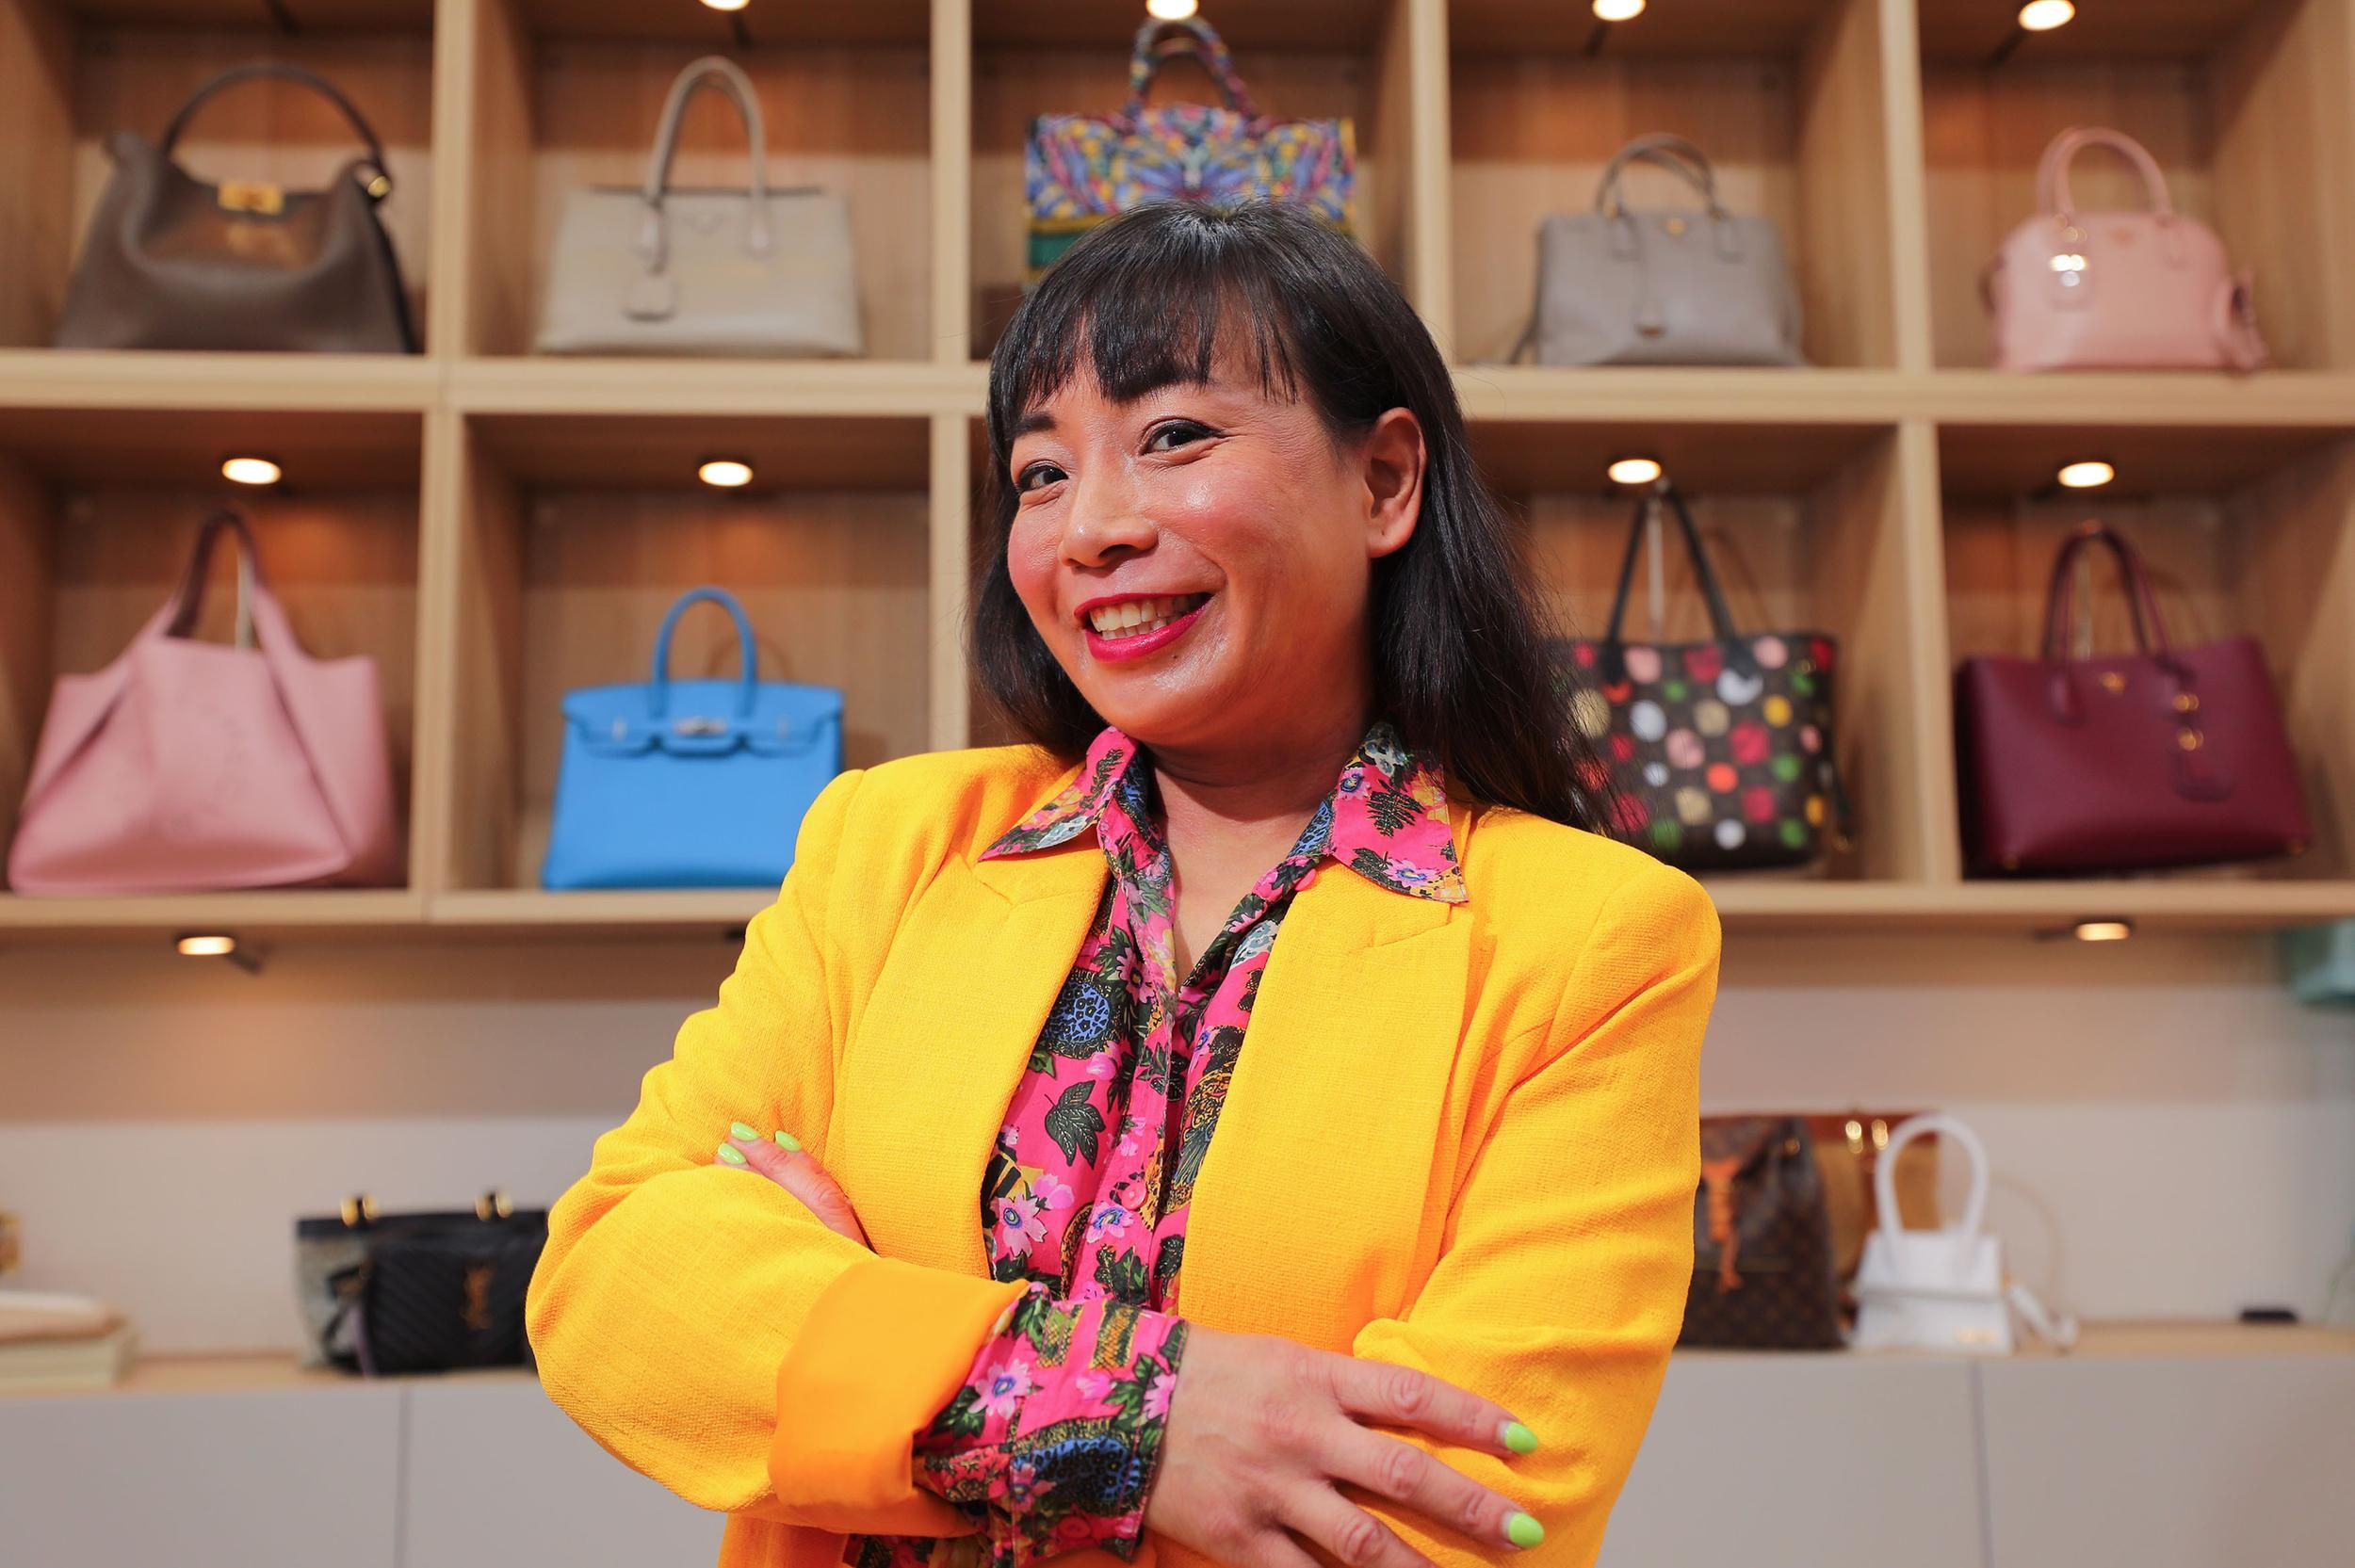 Bags of potential: Why designer handbags make the ideal inflation-proof  investment